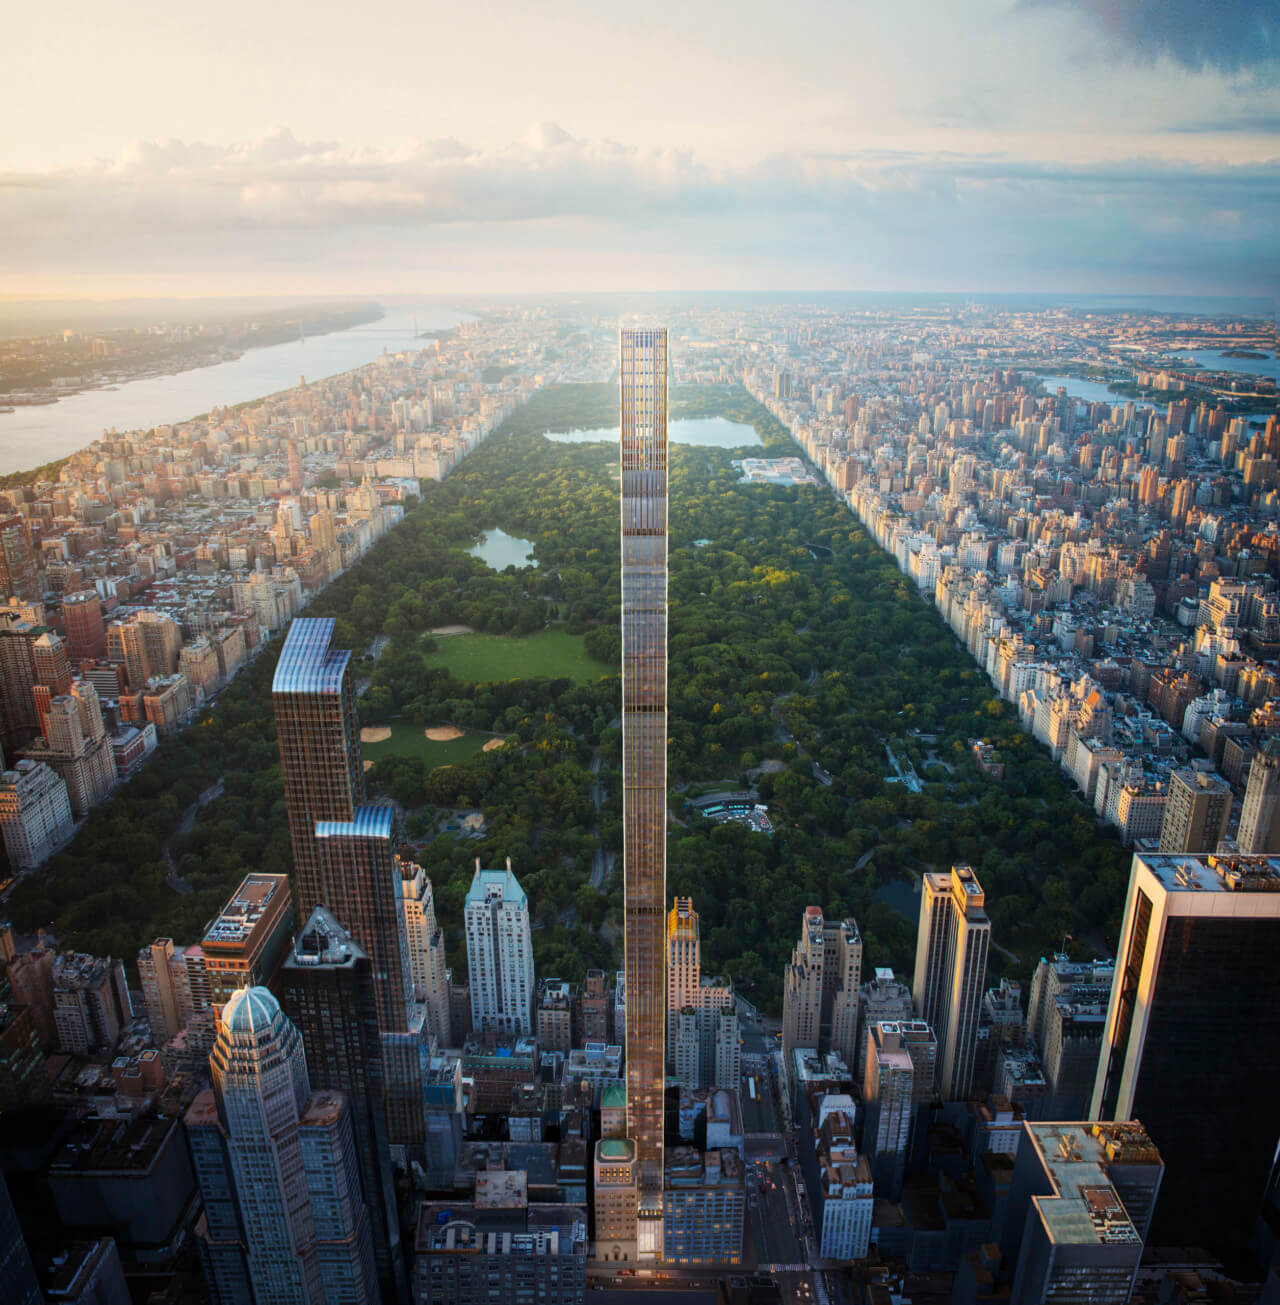 rendering of 111 west 5th street, a pencil-thin tower looming over central park